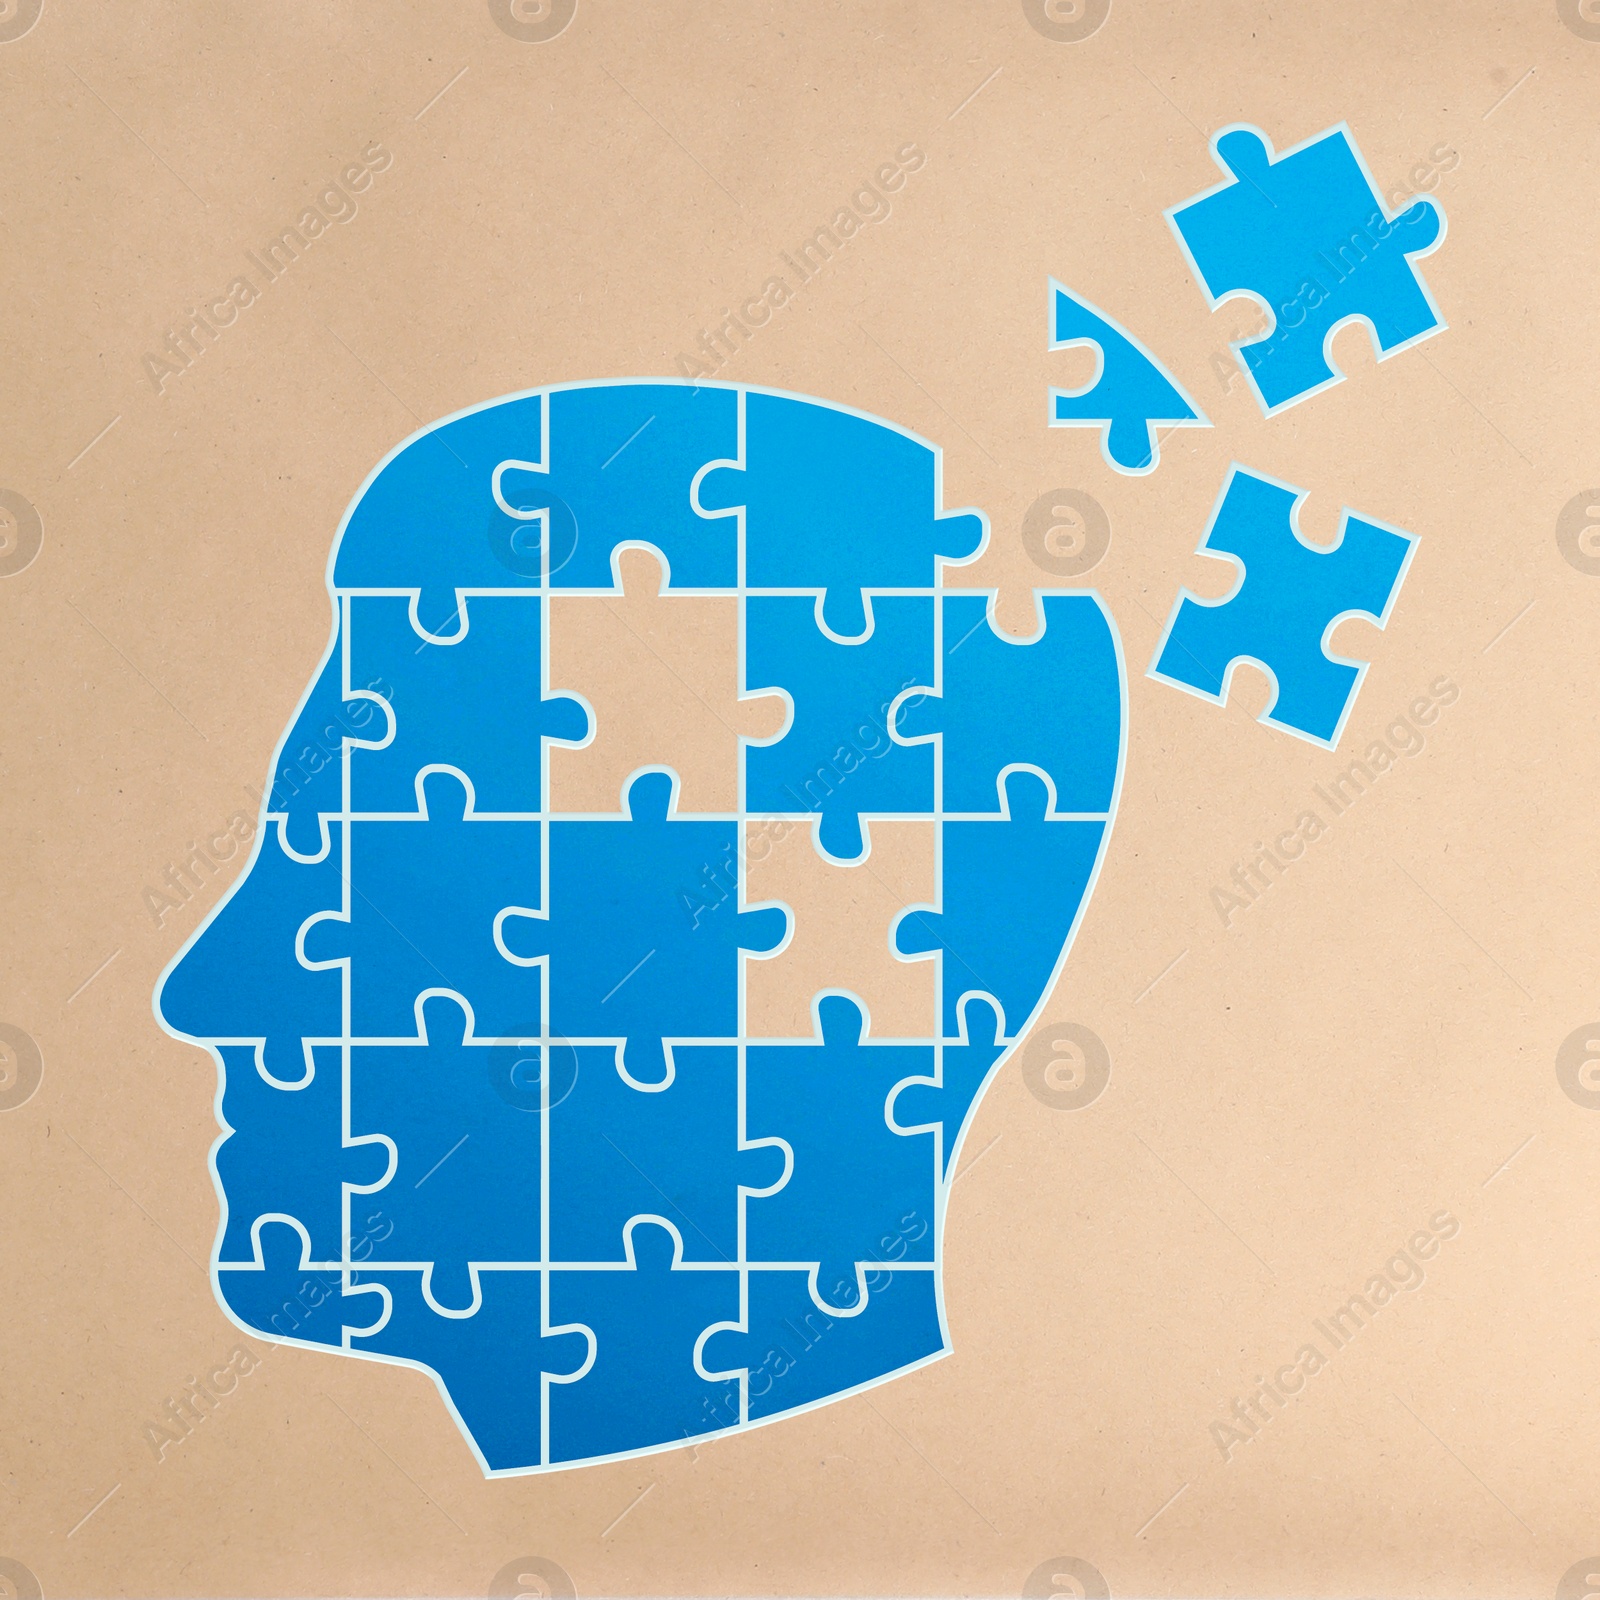 Illustration of Dementia concept. Drawing of blue head shaped jigsaw puzzle with missing pieces on beige background